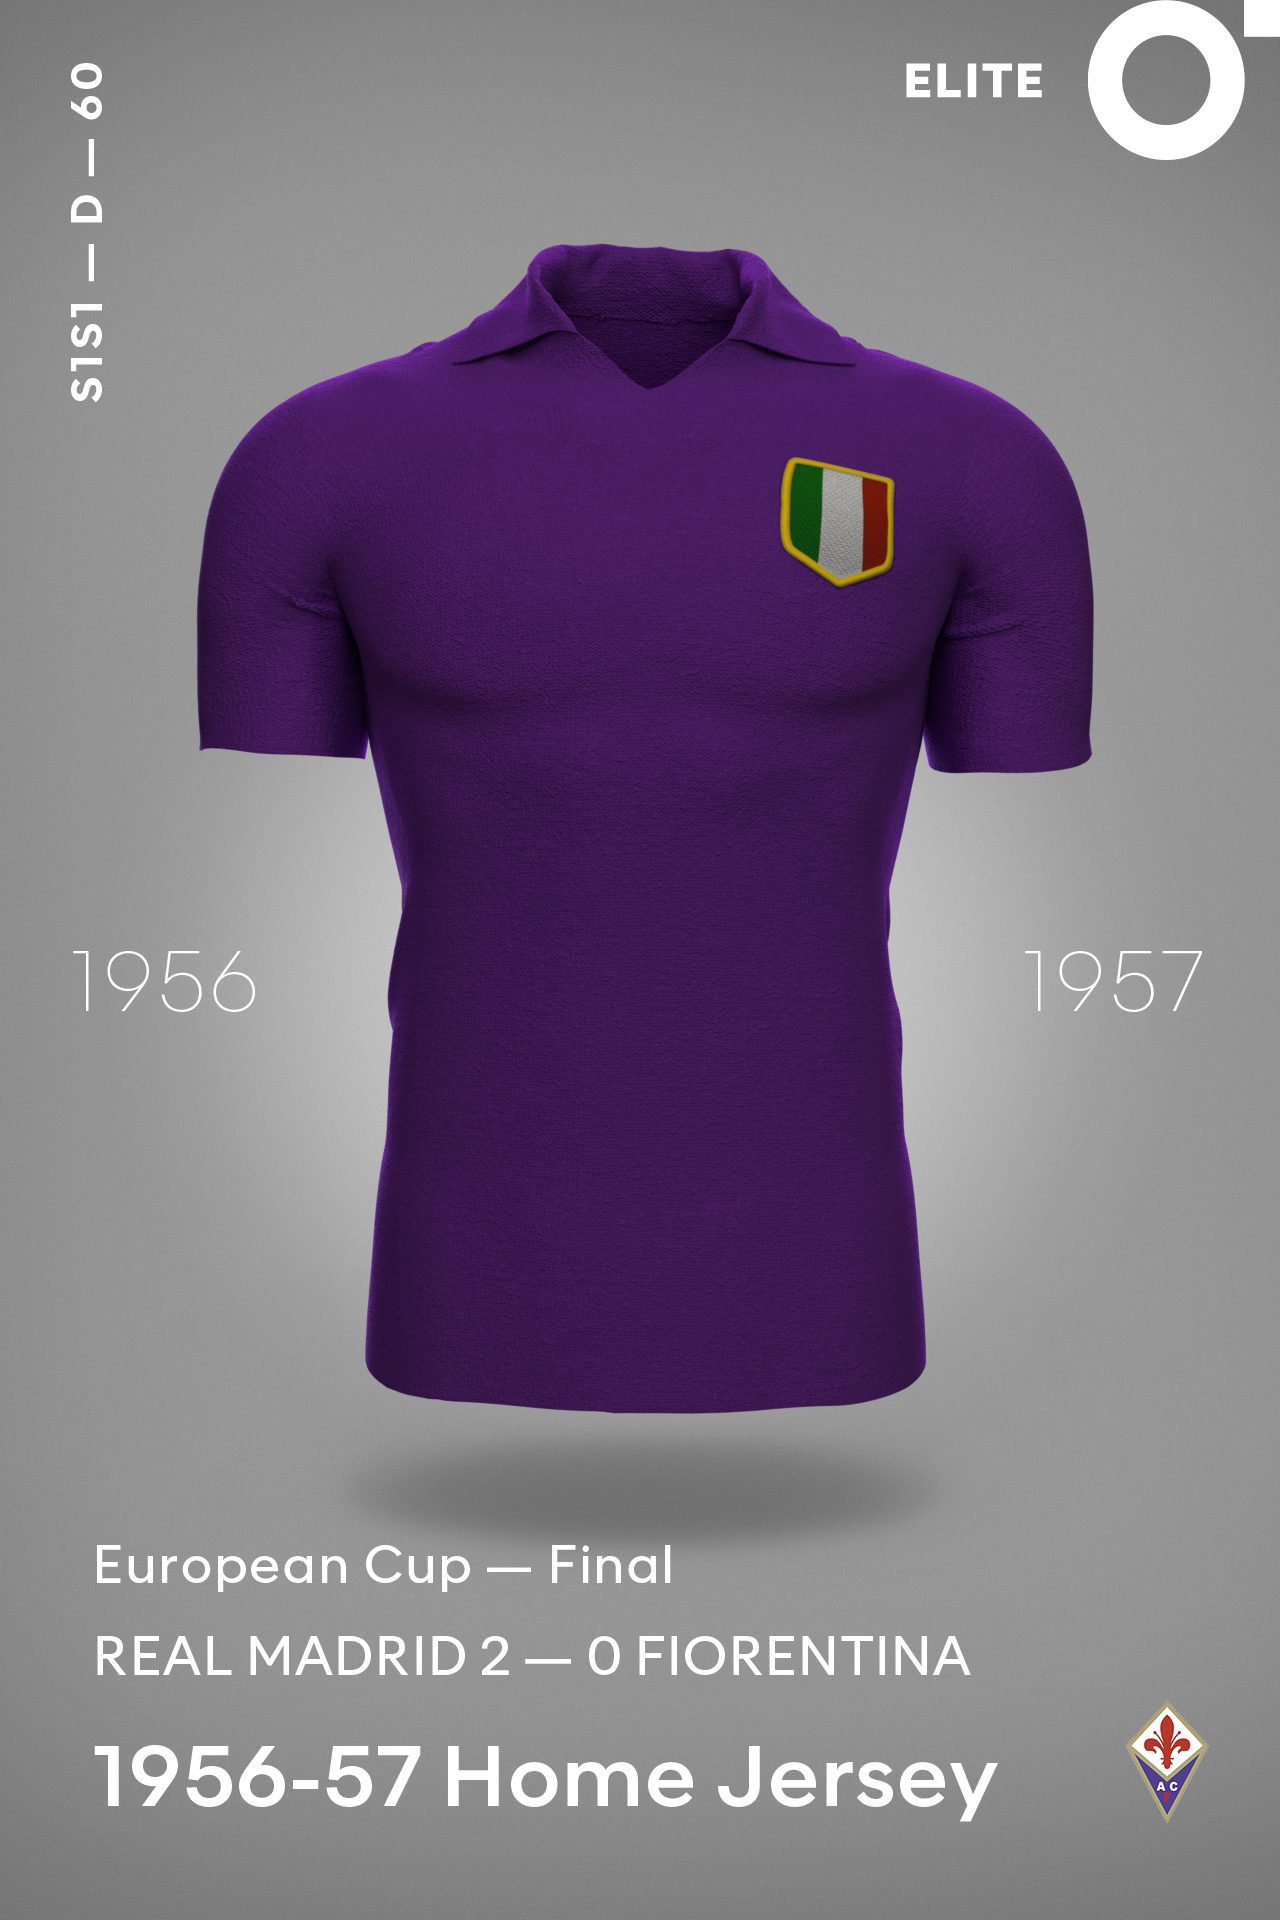 ACF Fiorentina enters the Metaverse with a special NFT collection